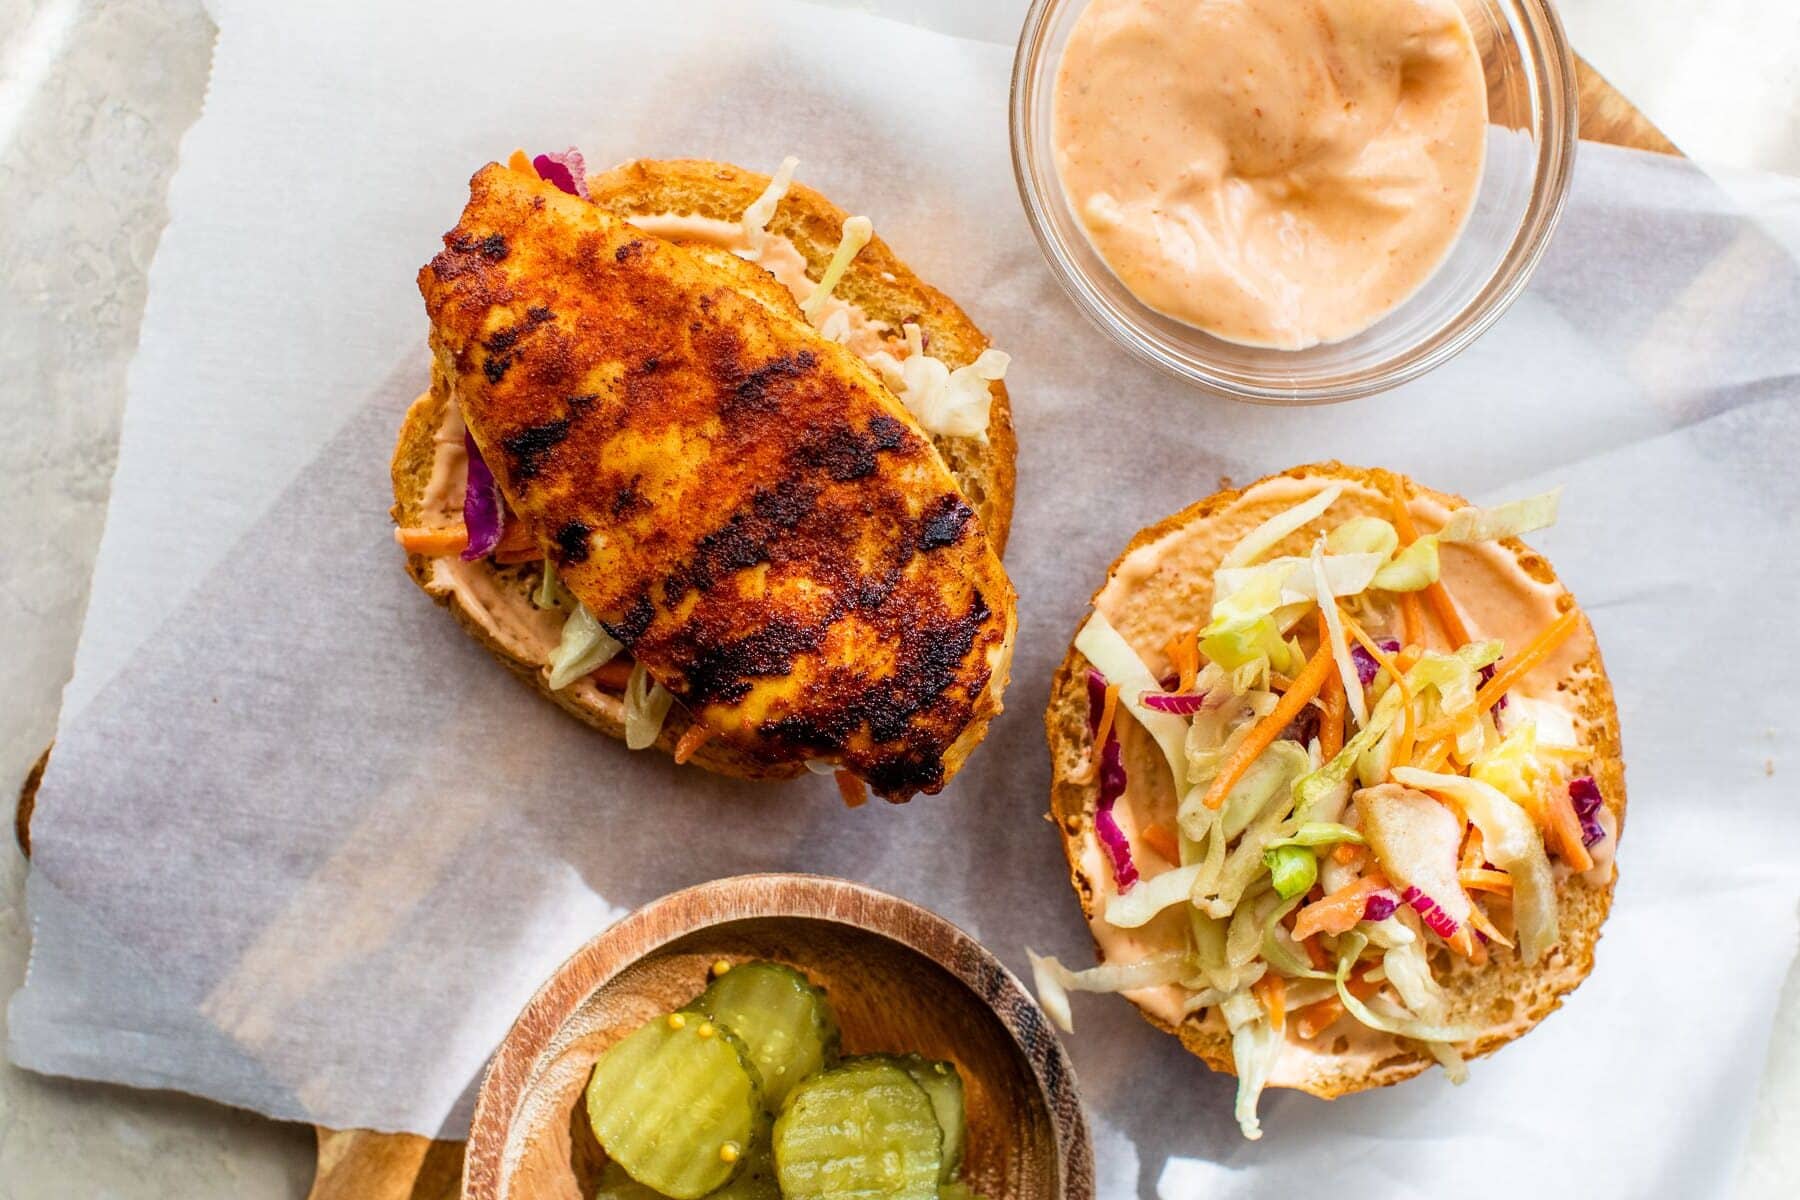 Grilled Chicken Sandwiches with slaw, pickles and spicy mayo